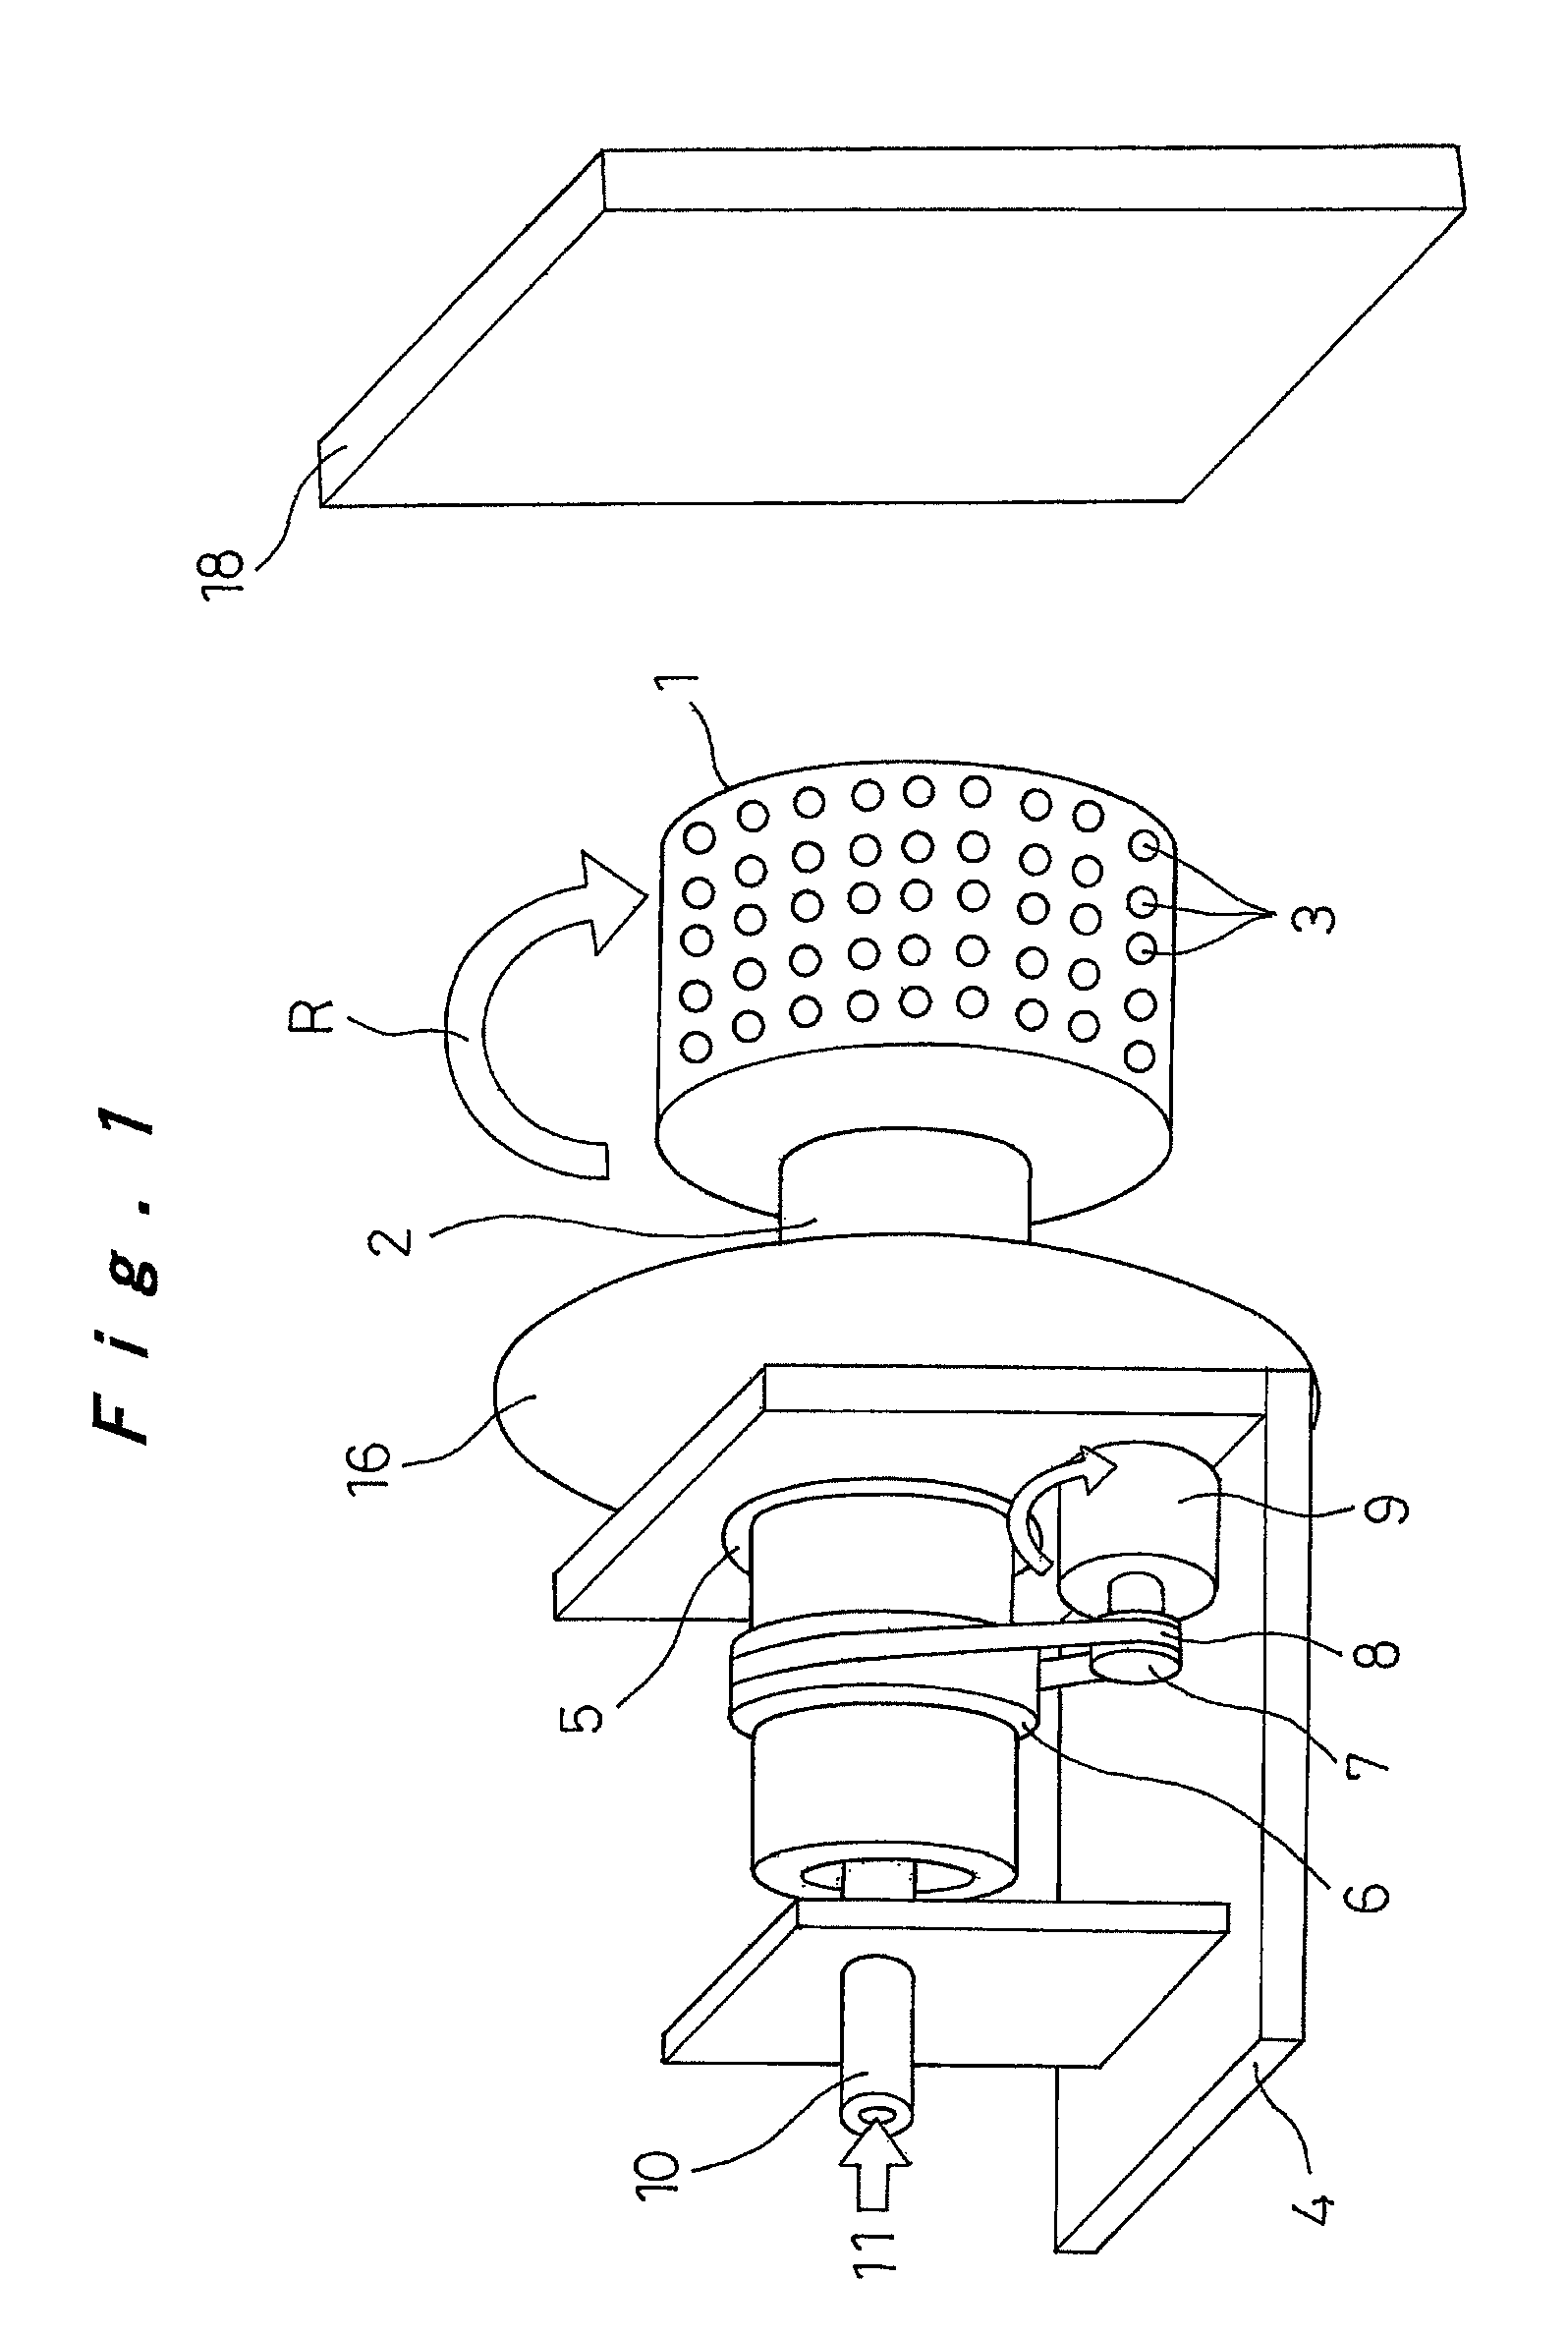 Method and apparatus for producing nanofibers and polymer web